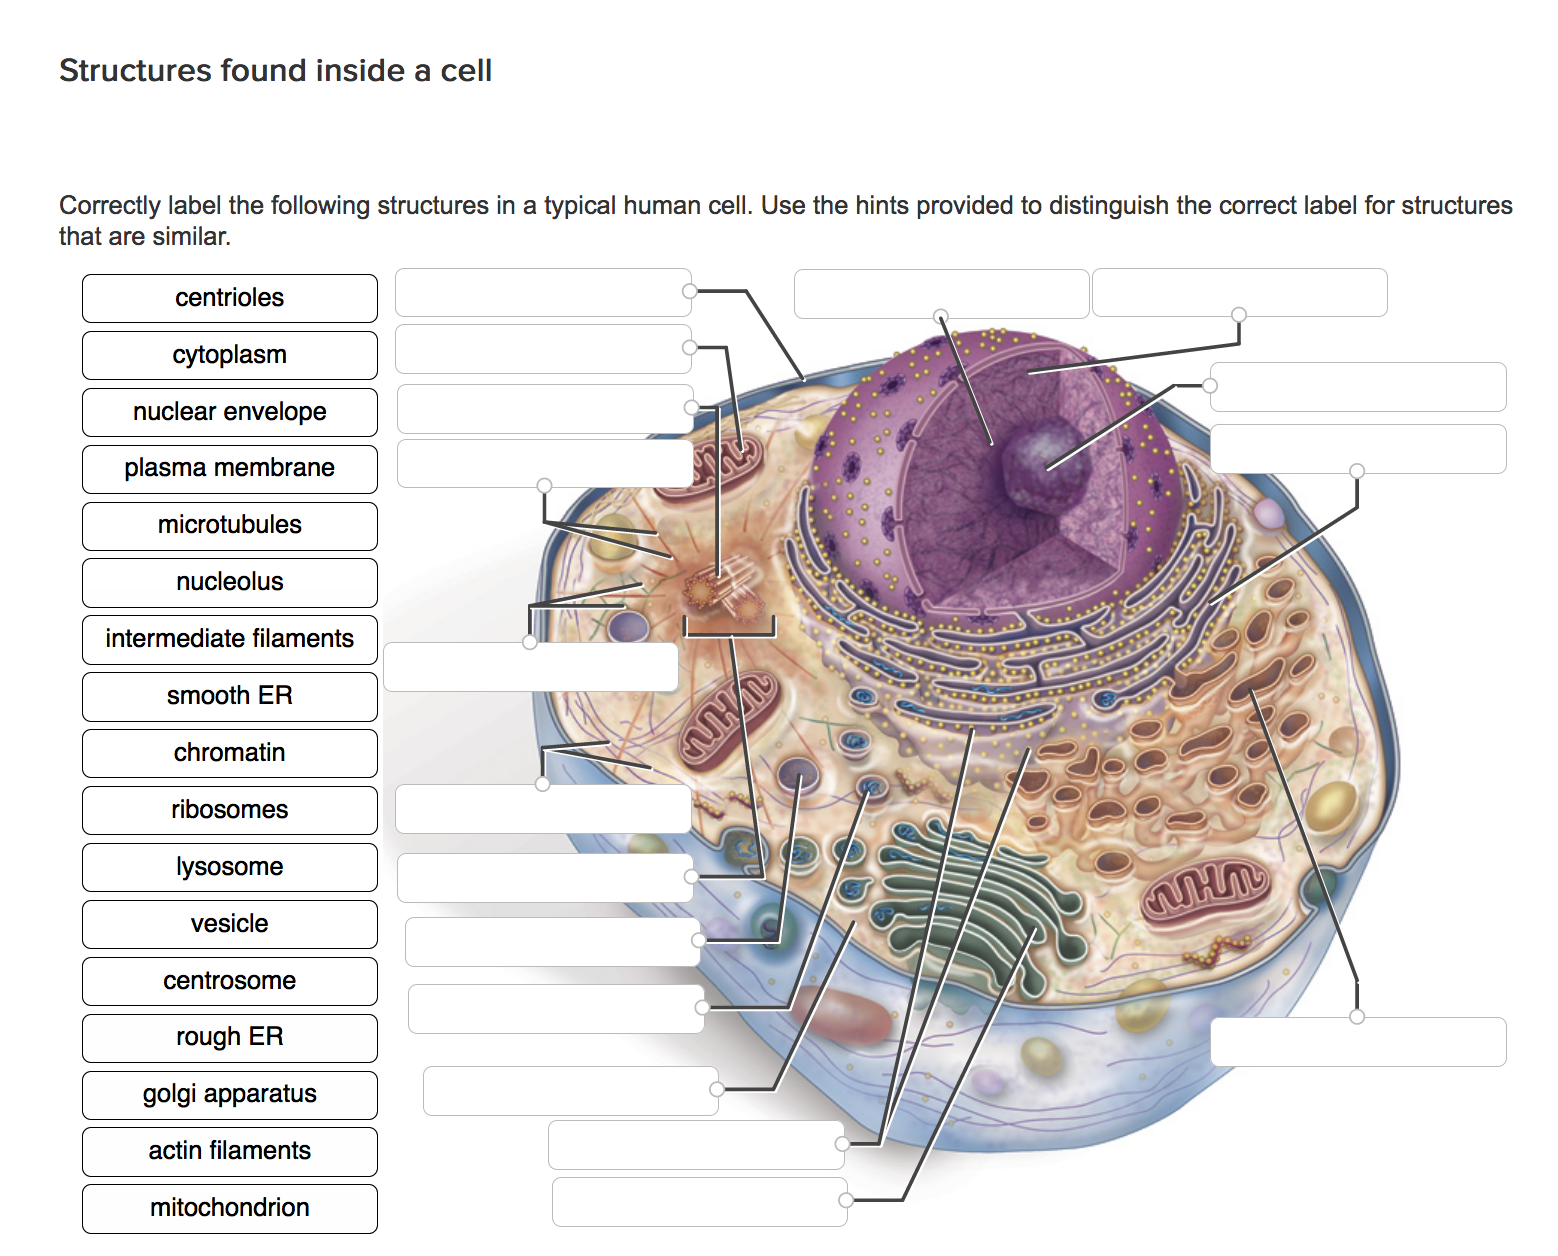 Correctly label the following structures in a typical human cell. 